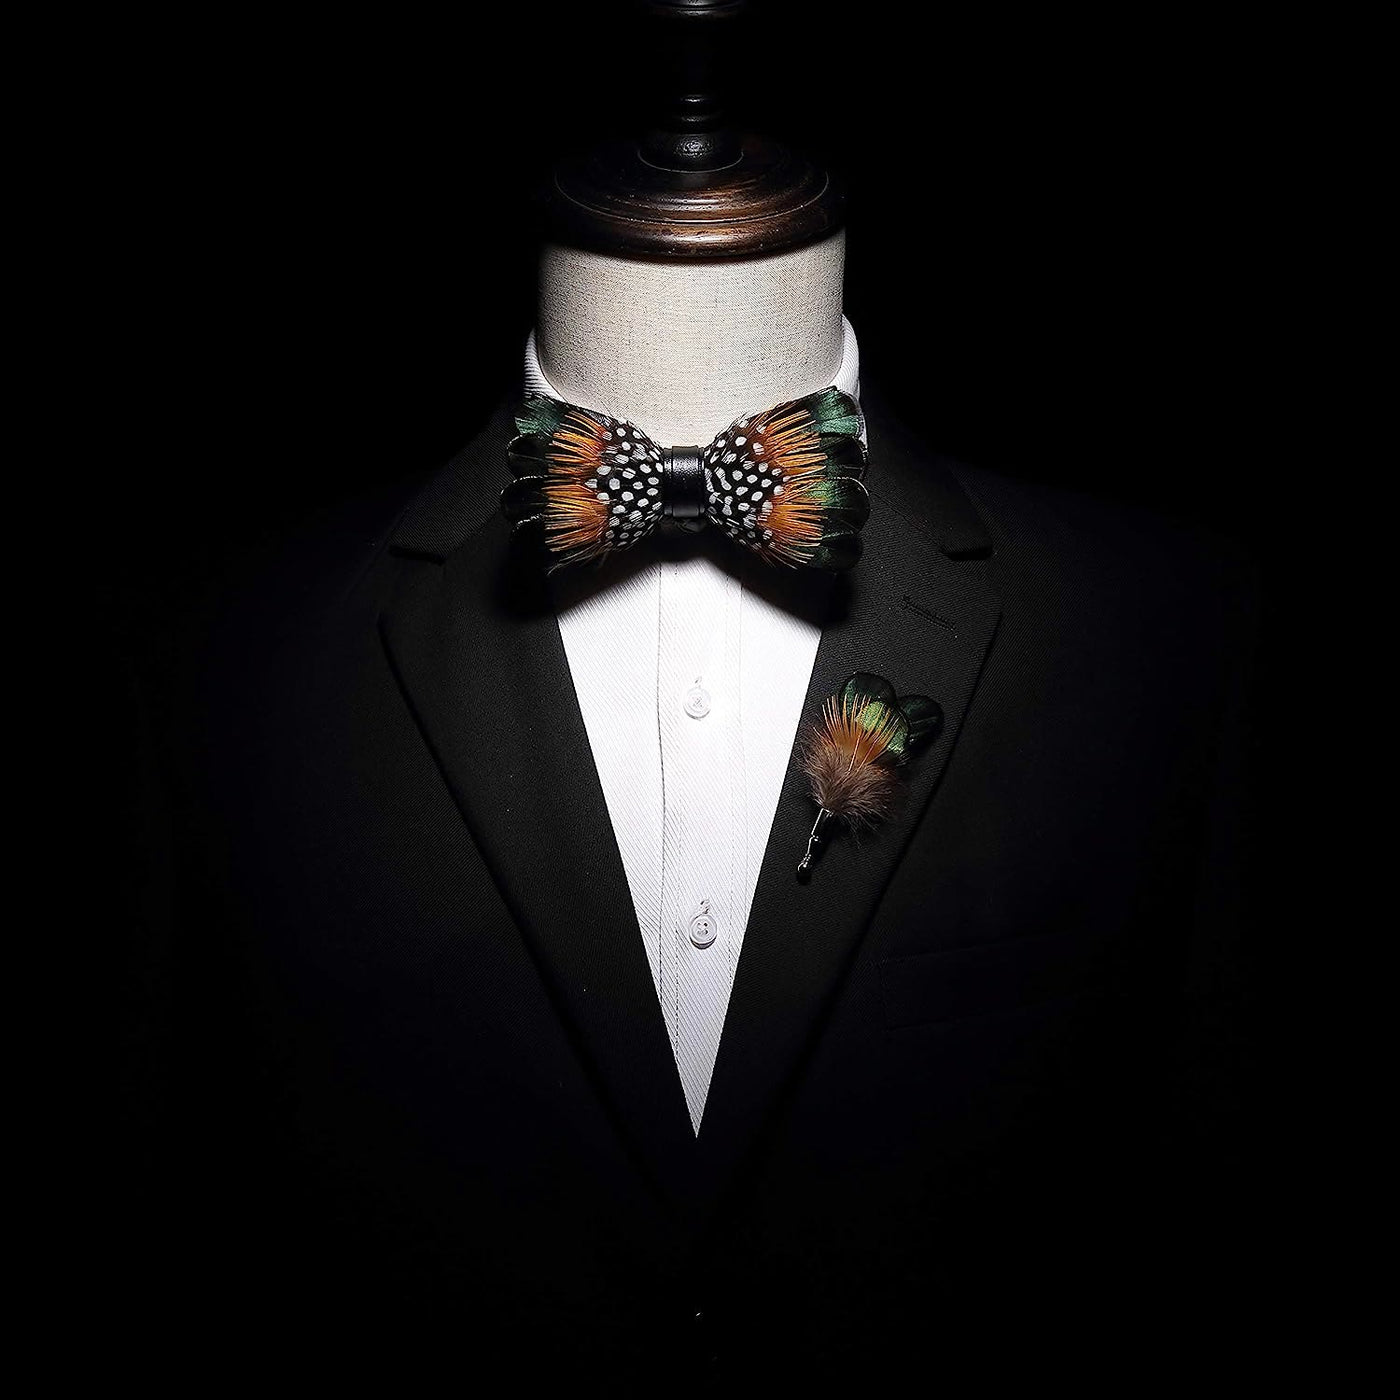 ForestGreen & Orange Vintage Feather Bow Tie with Lapel Pin